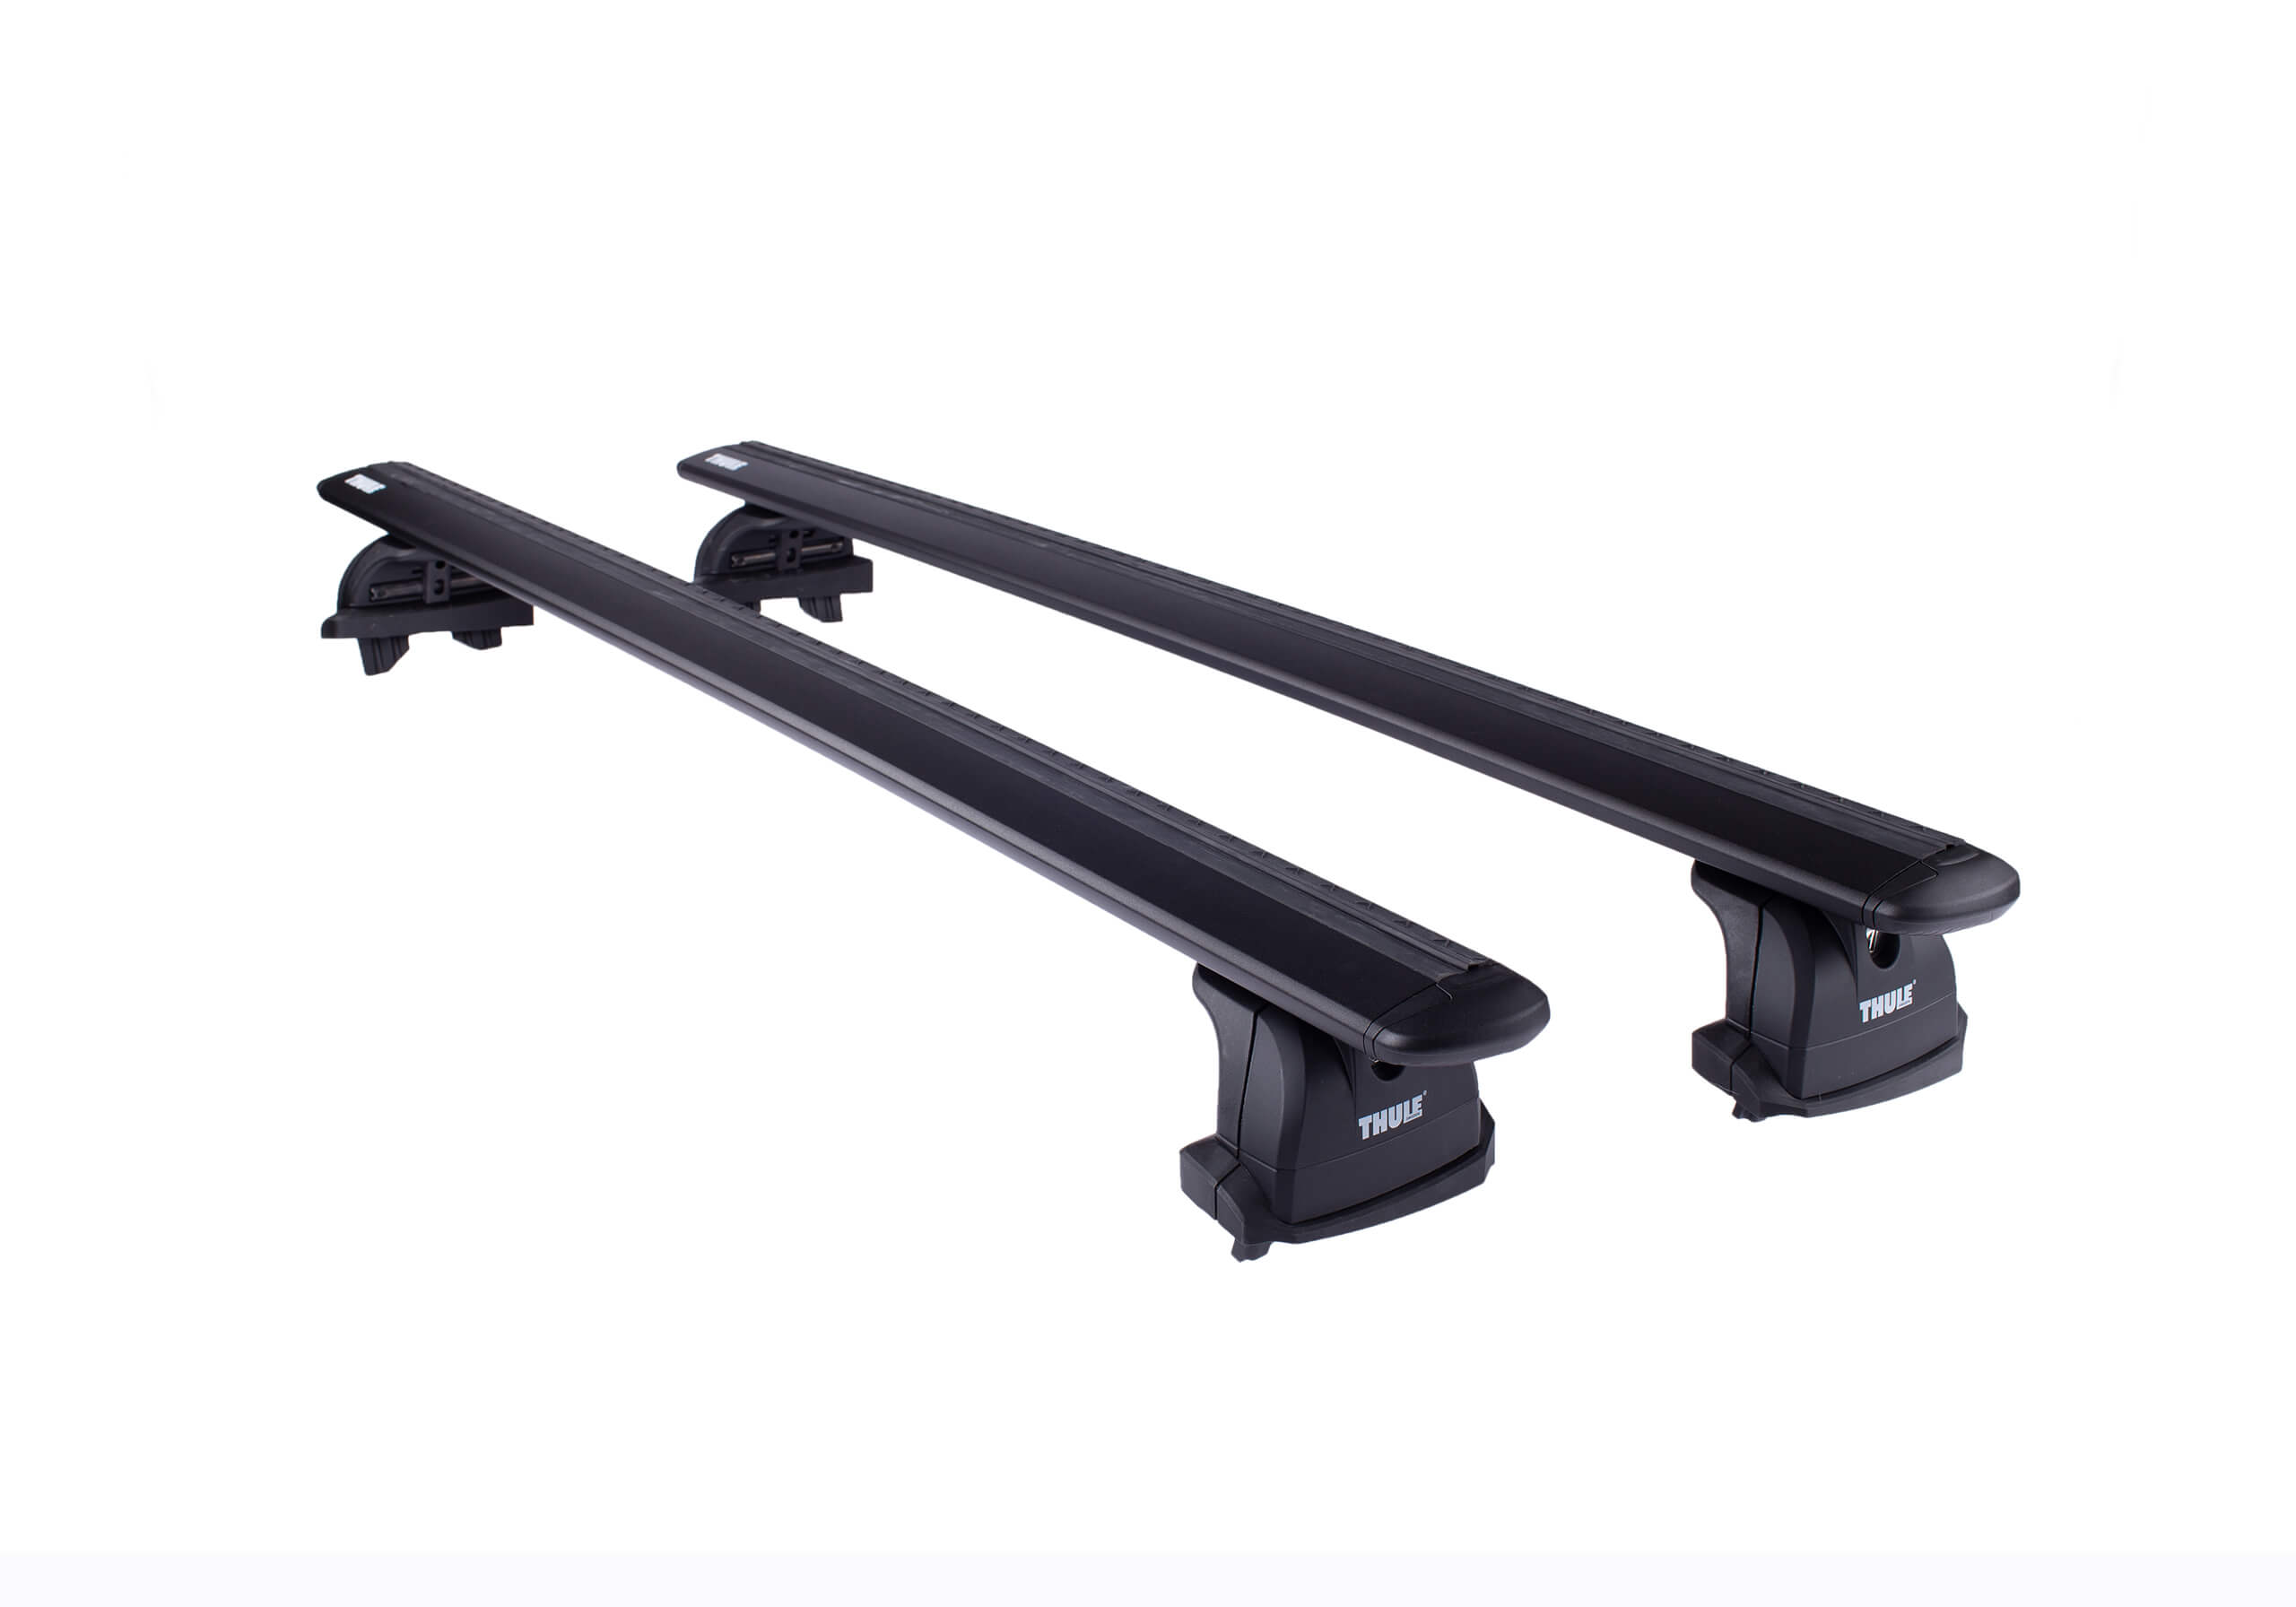 BMW 5 series Touring (2001 to 2004):Thule black WingBars package - 753, 7112B, 3065